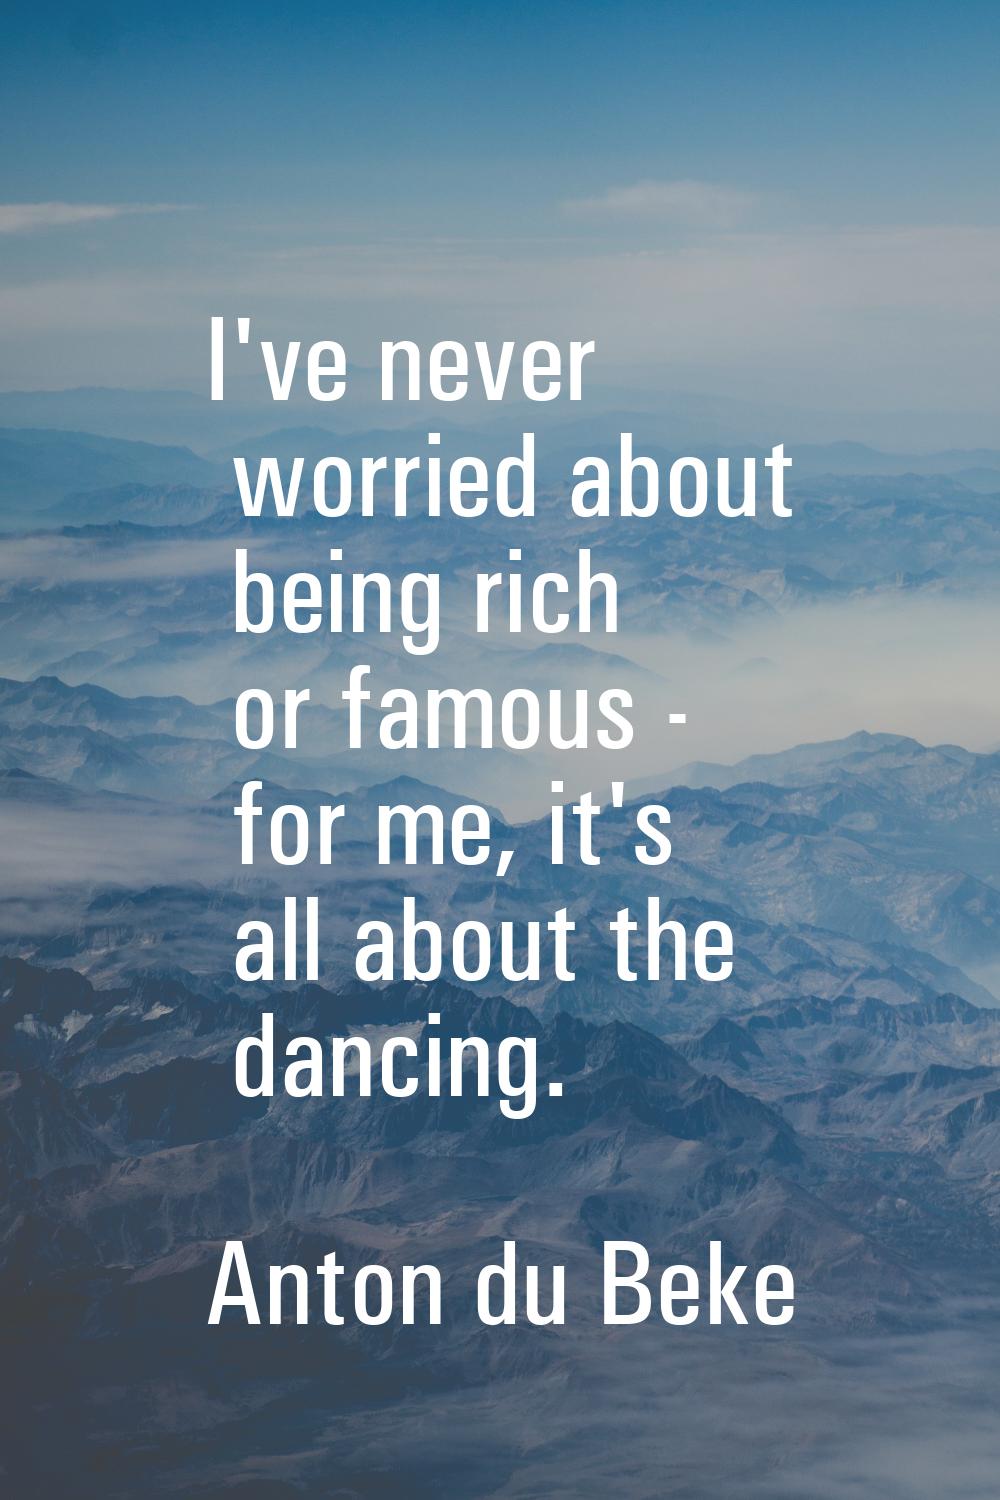 I've never worried about being rich or famous - for me, it's all about the dancing.